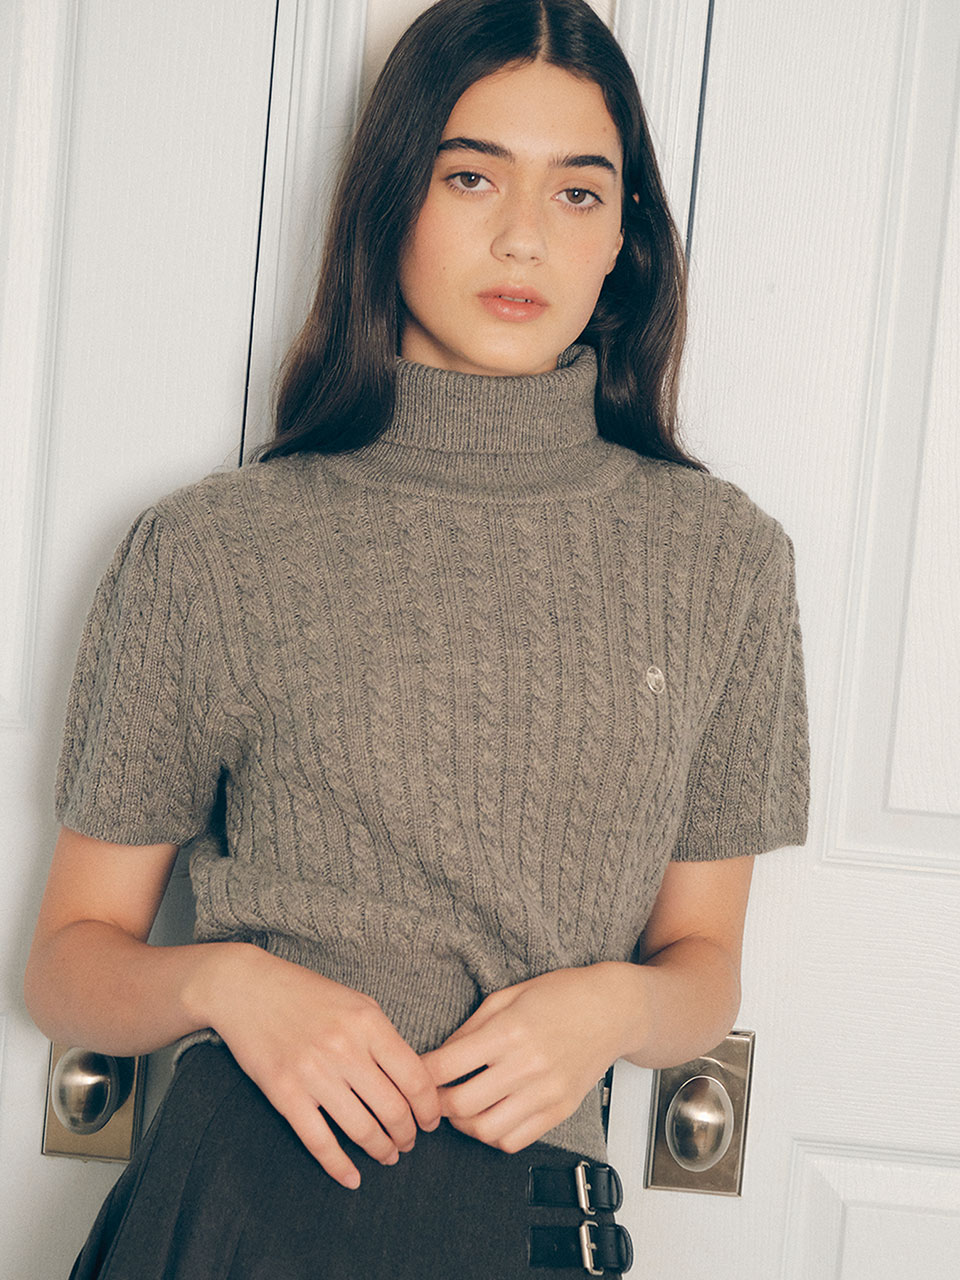 WOOL CABLE HALF SLEEVE KNIT GRAY